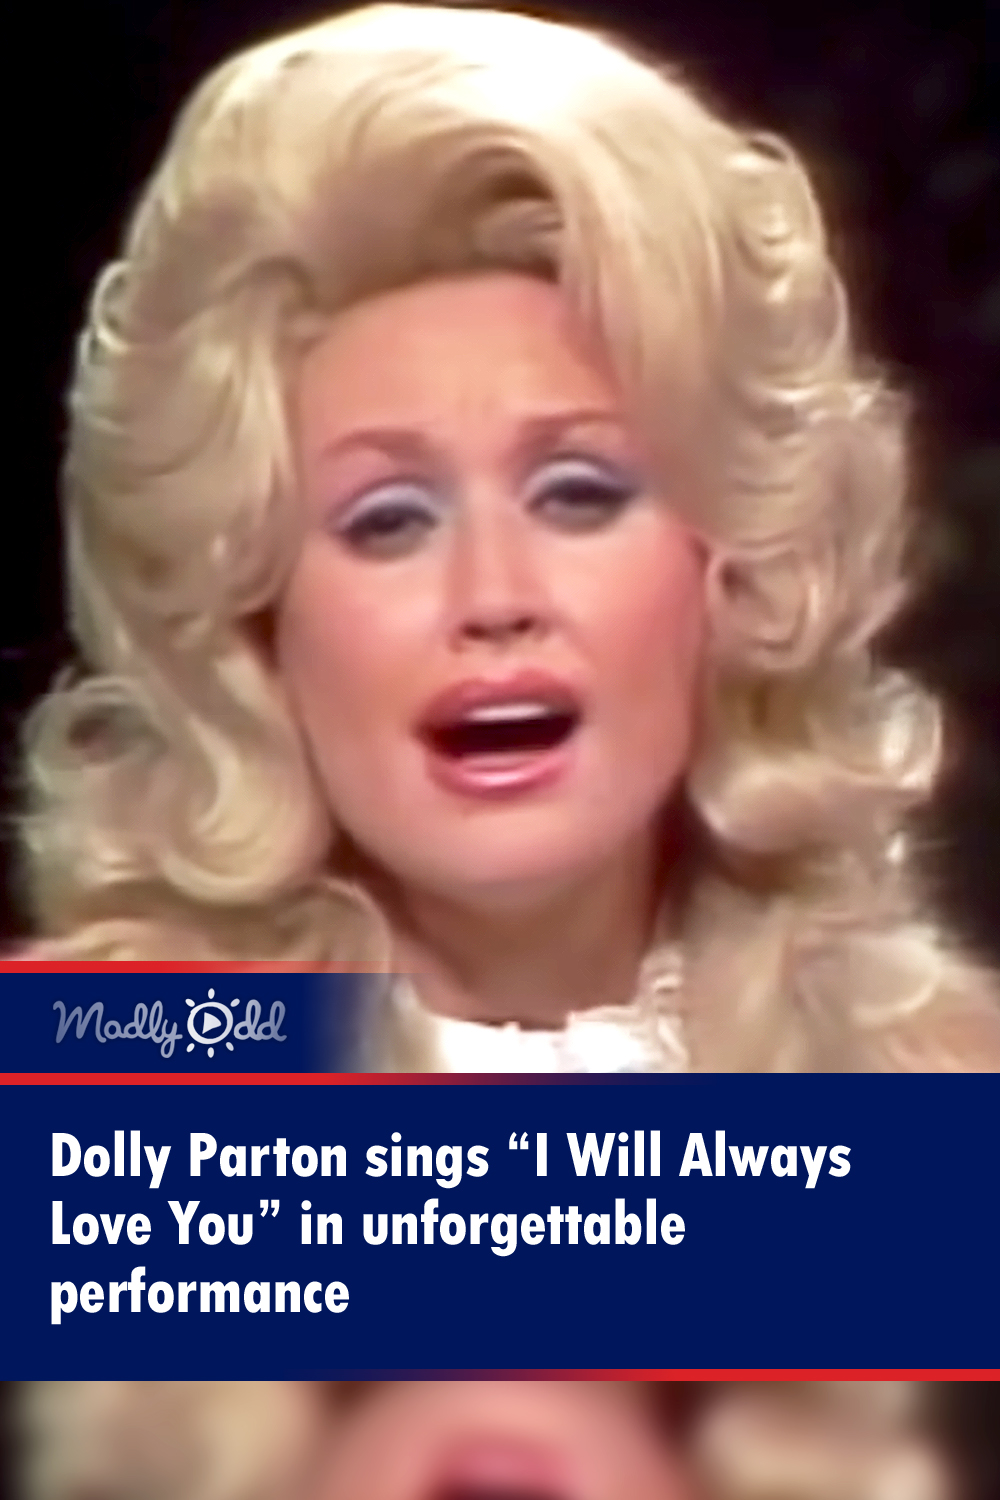 Dolly Parton sings “I Will Always Love You” in unforgettable performance